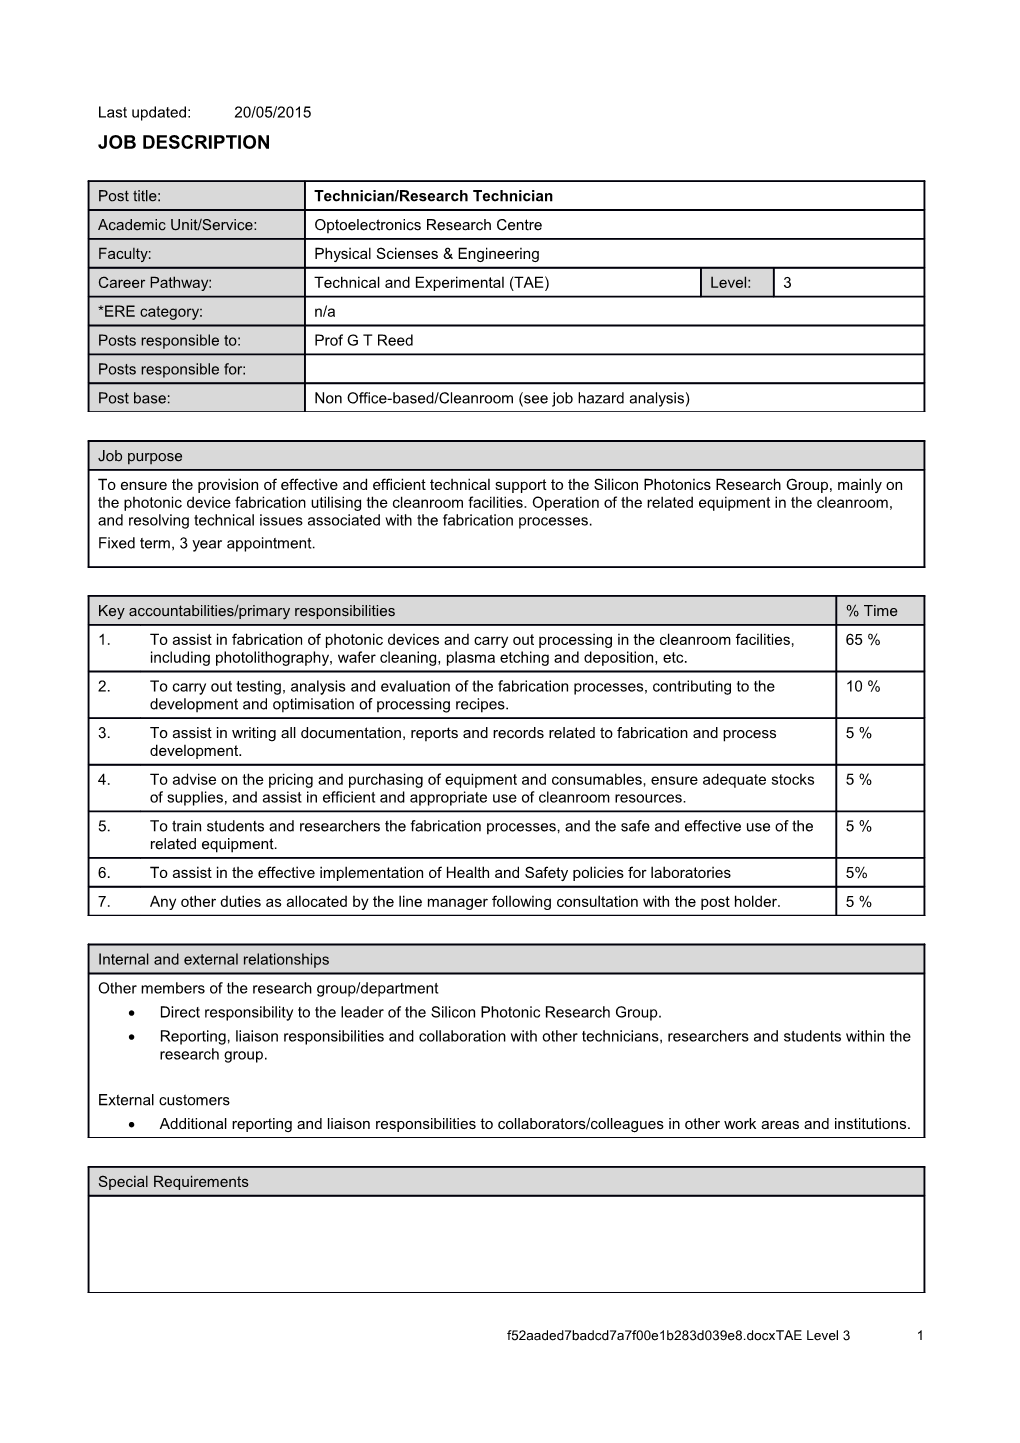 Person Specification s36